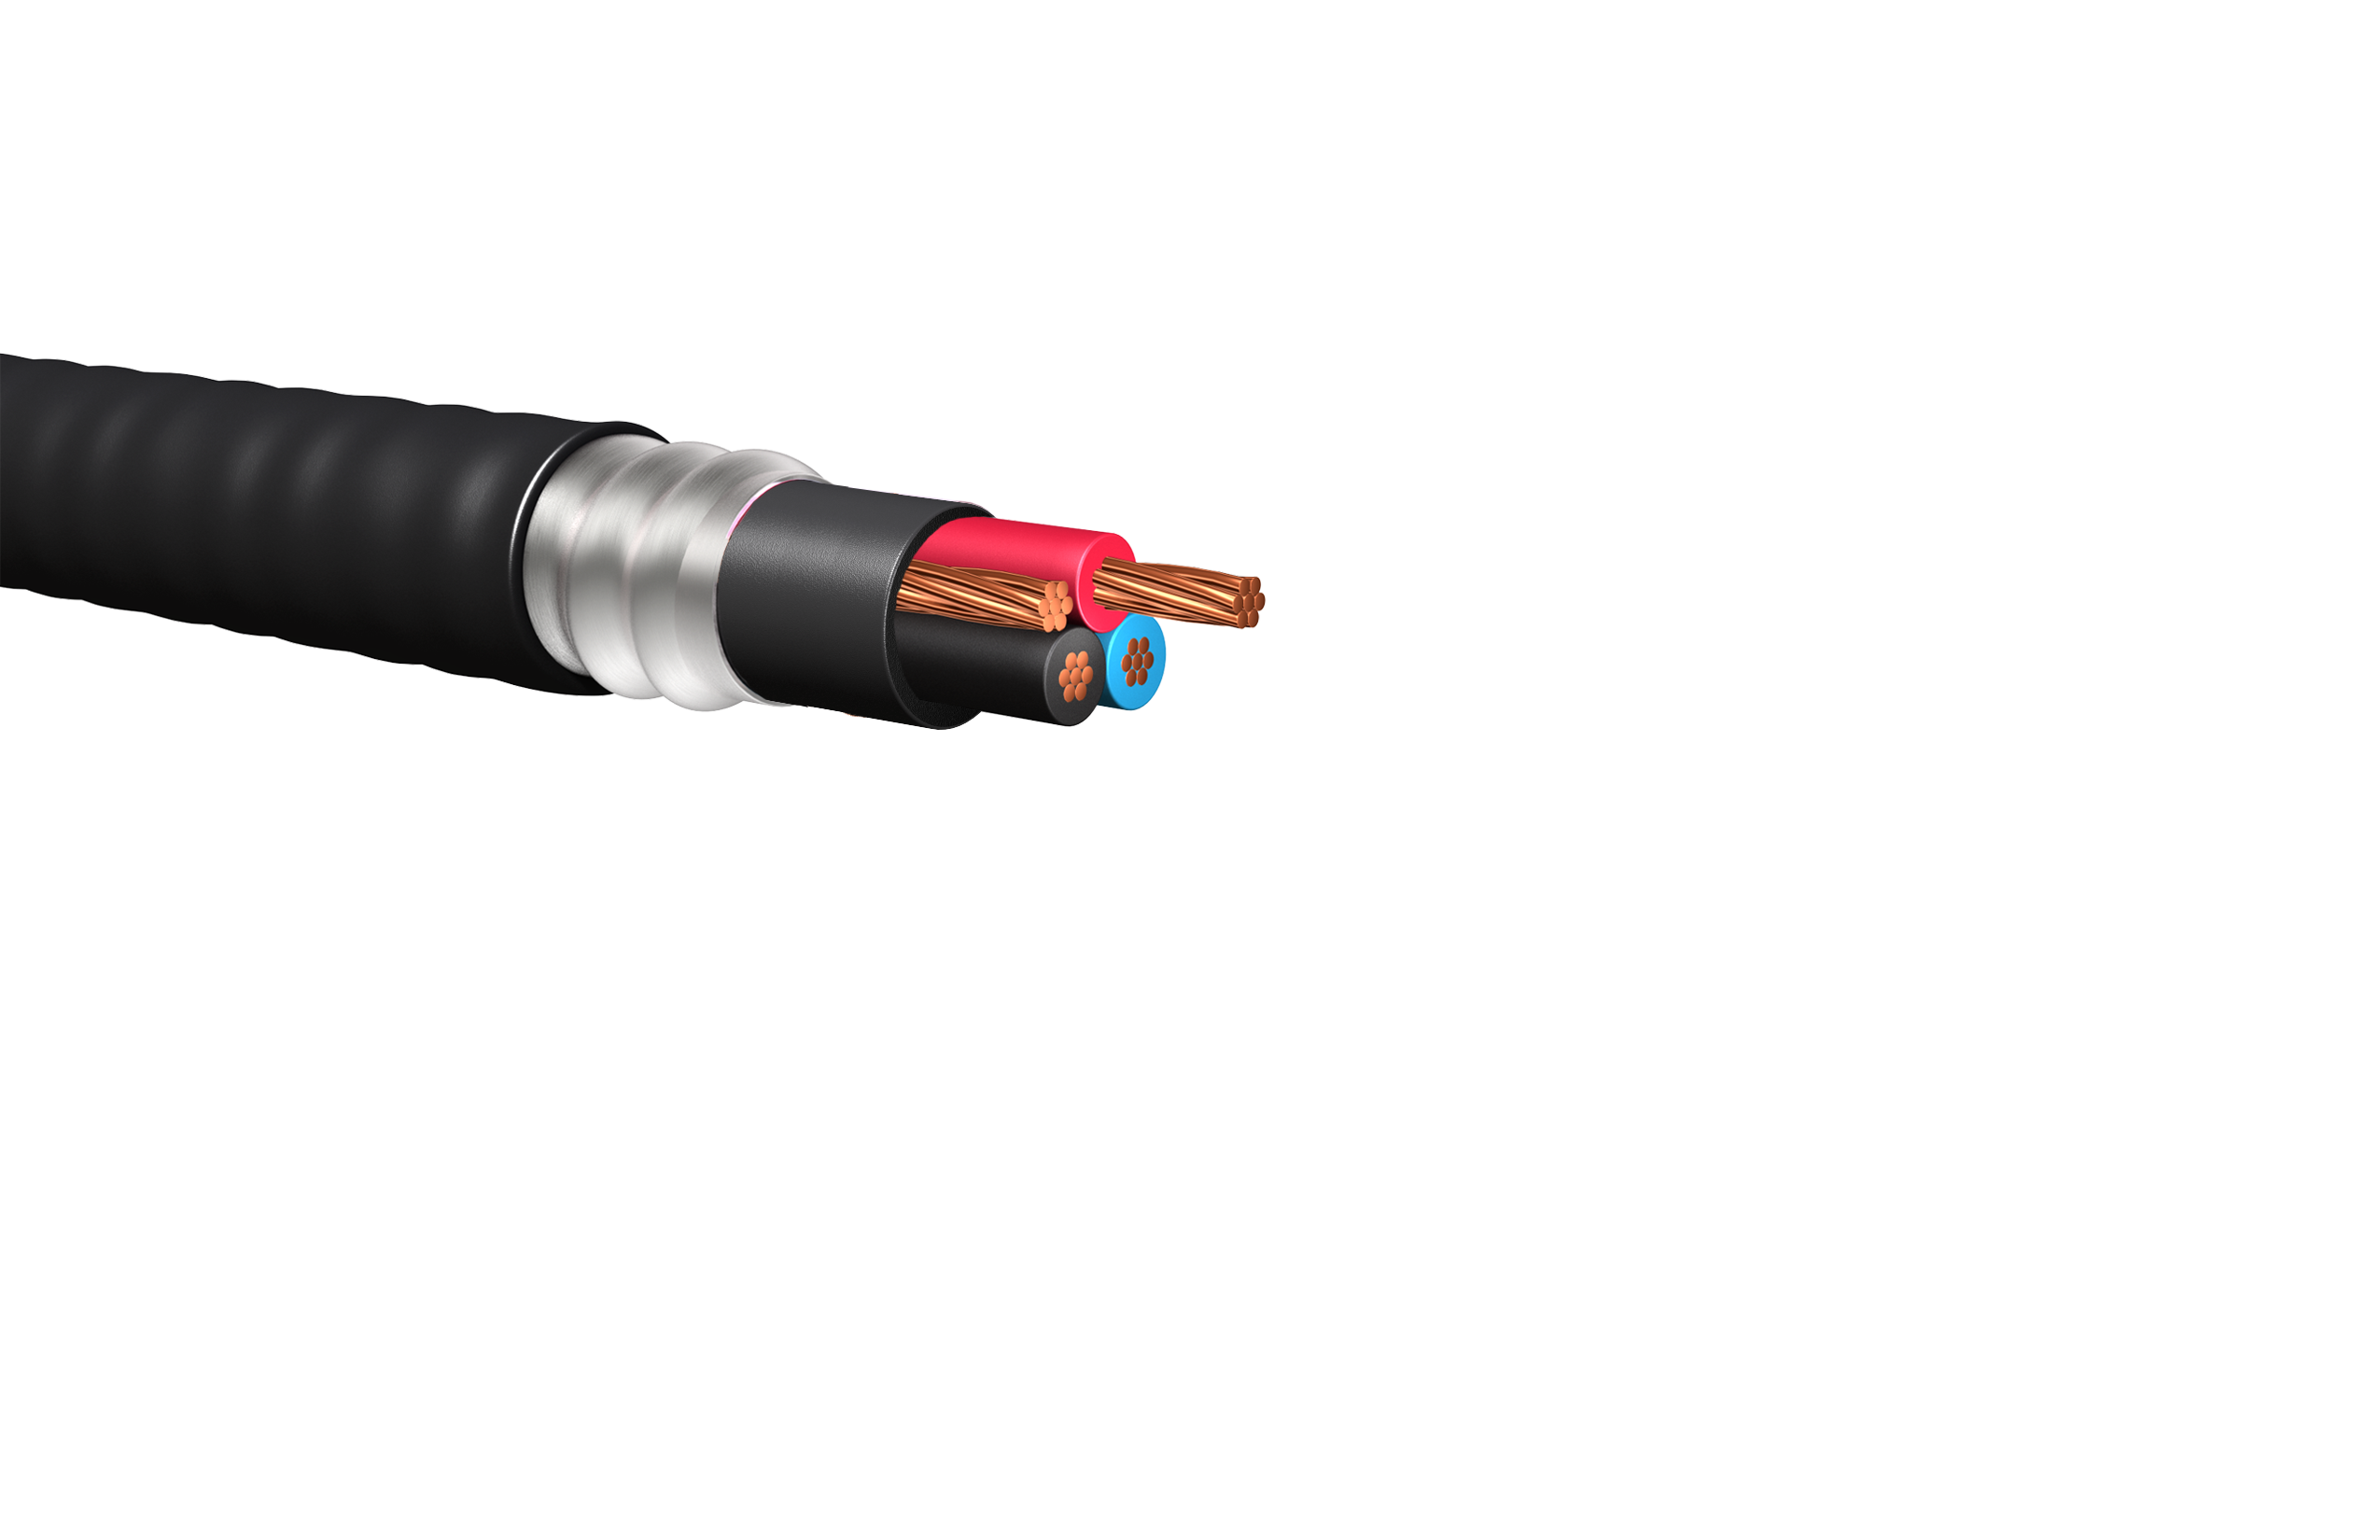 HW331: 1kV AIA Power Cable, Teck 90